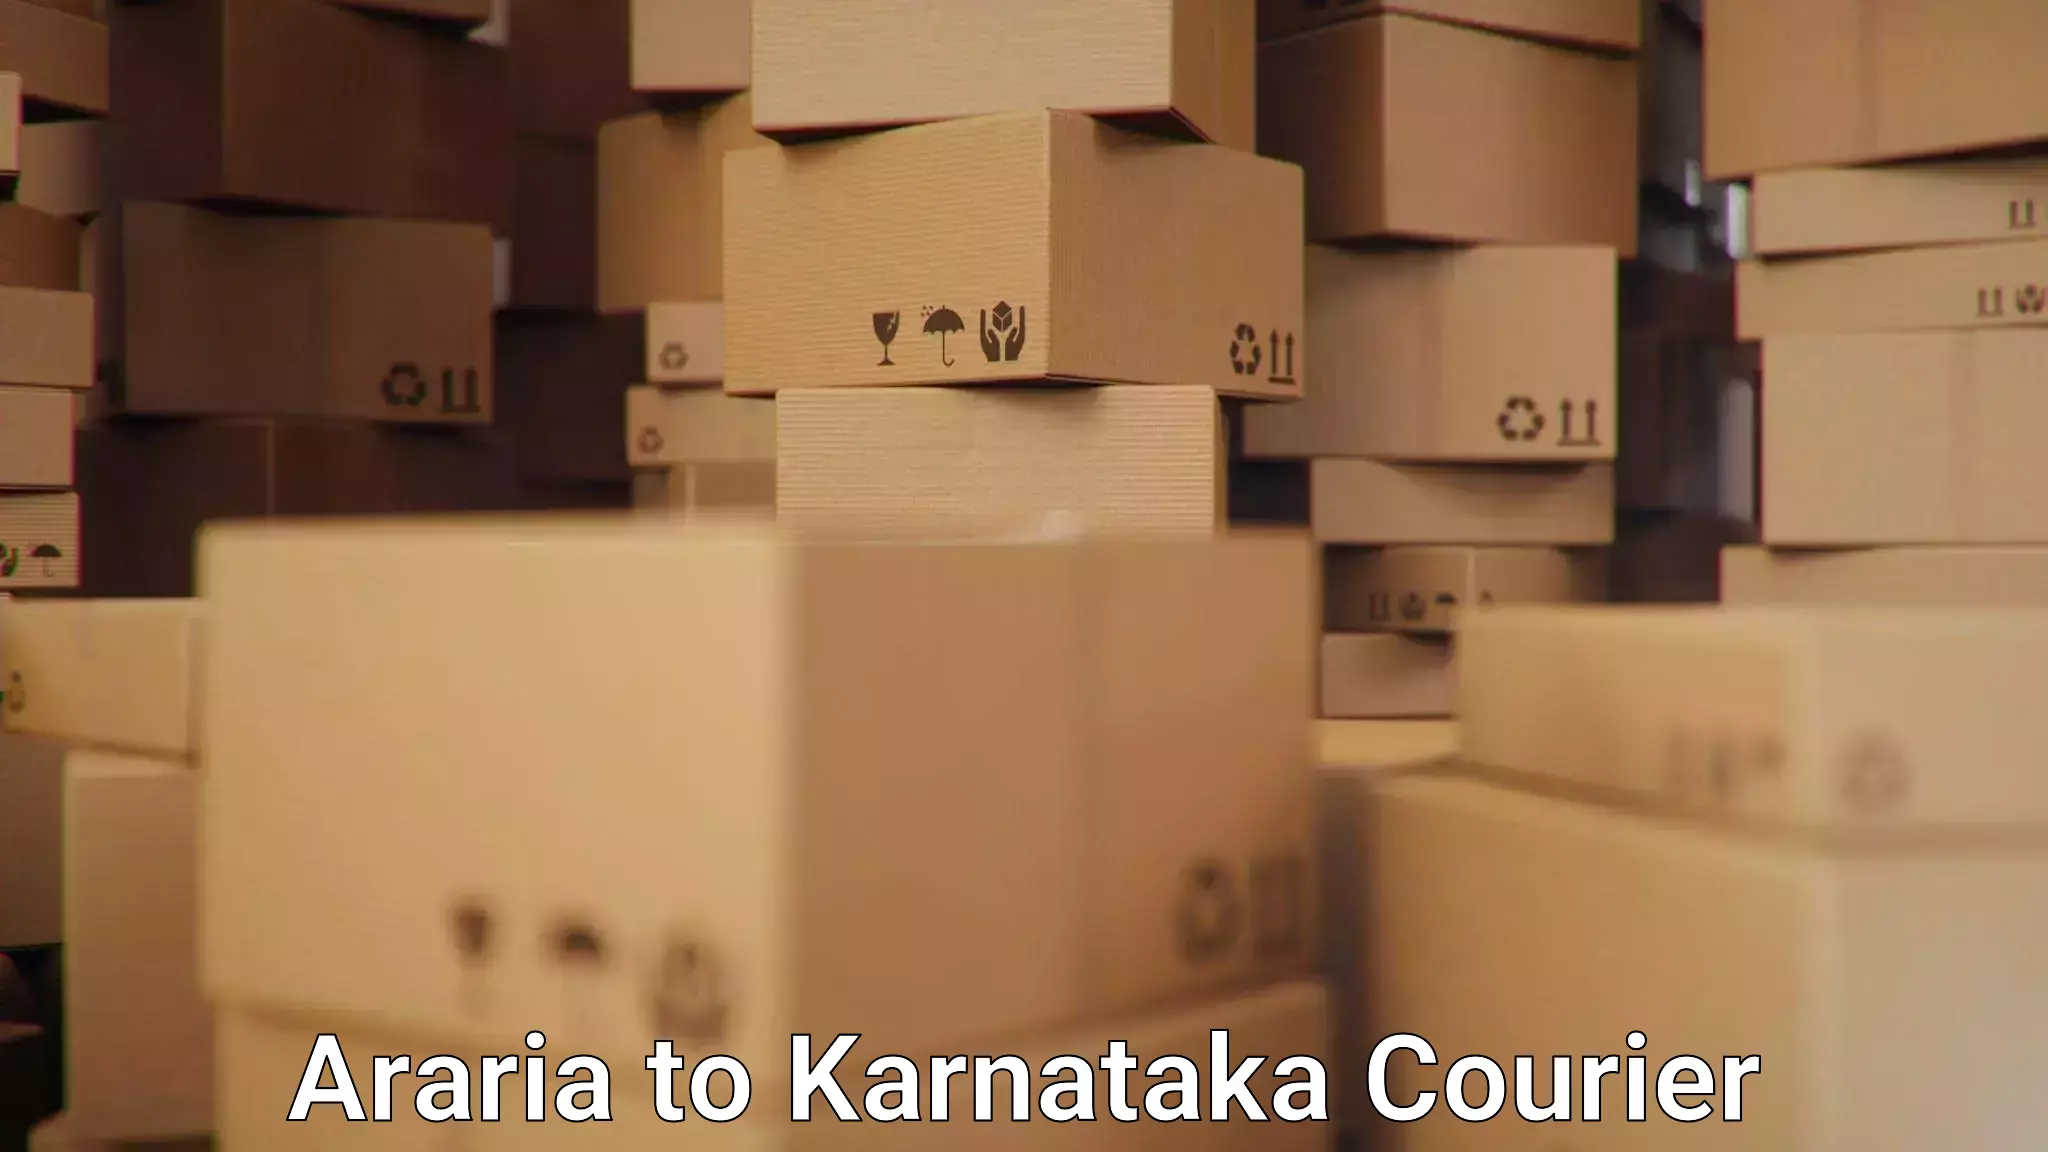 Efficient courier operations Araria to Karnataka